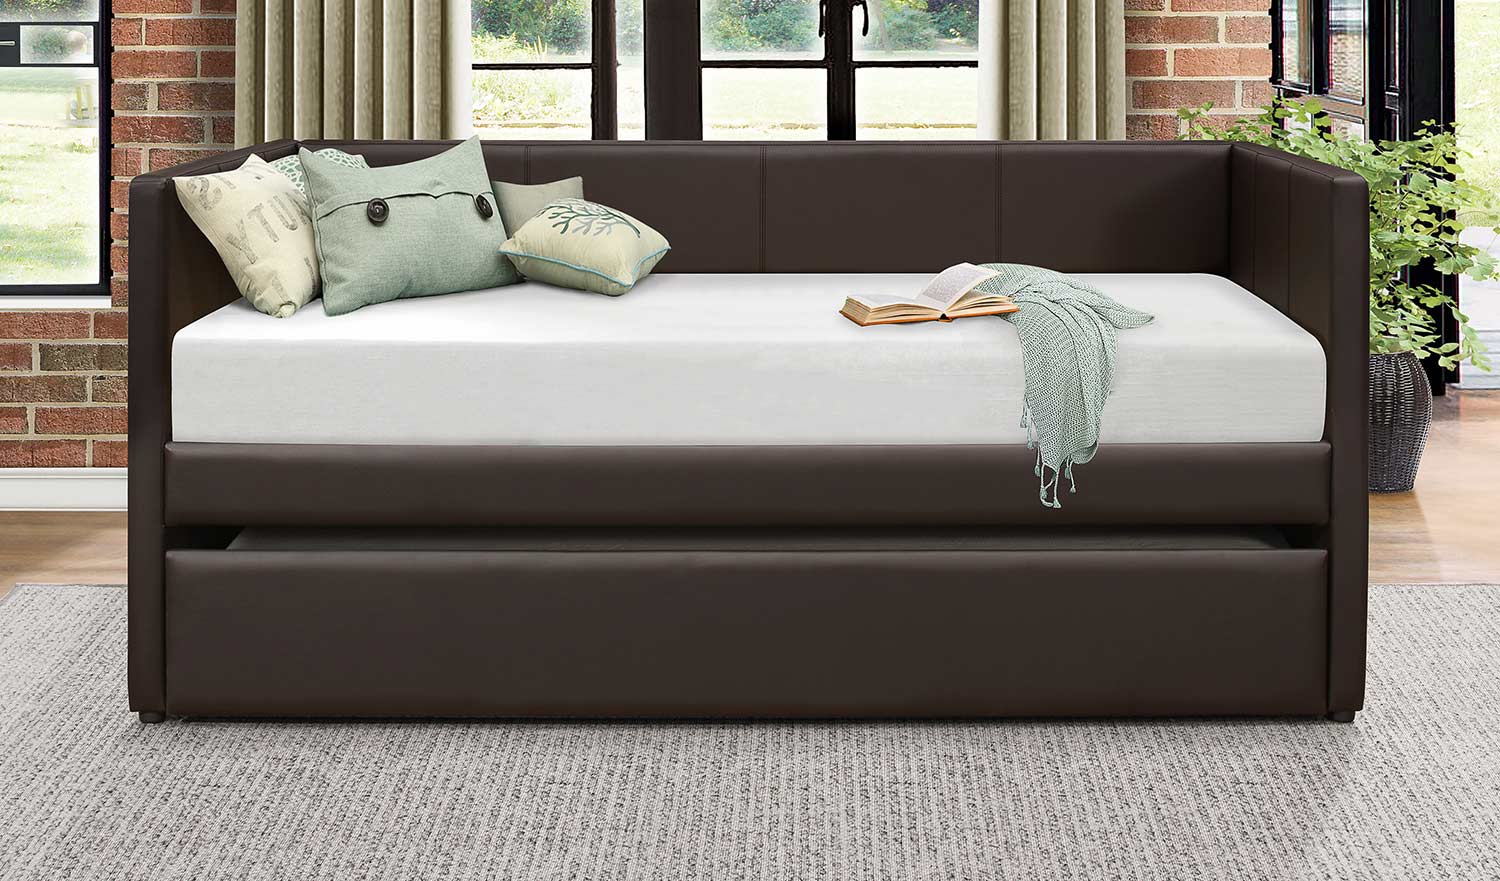 Homelegance Adra Daybed with Trundle - Dark Brown